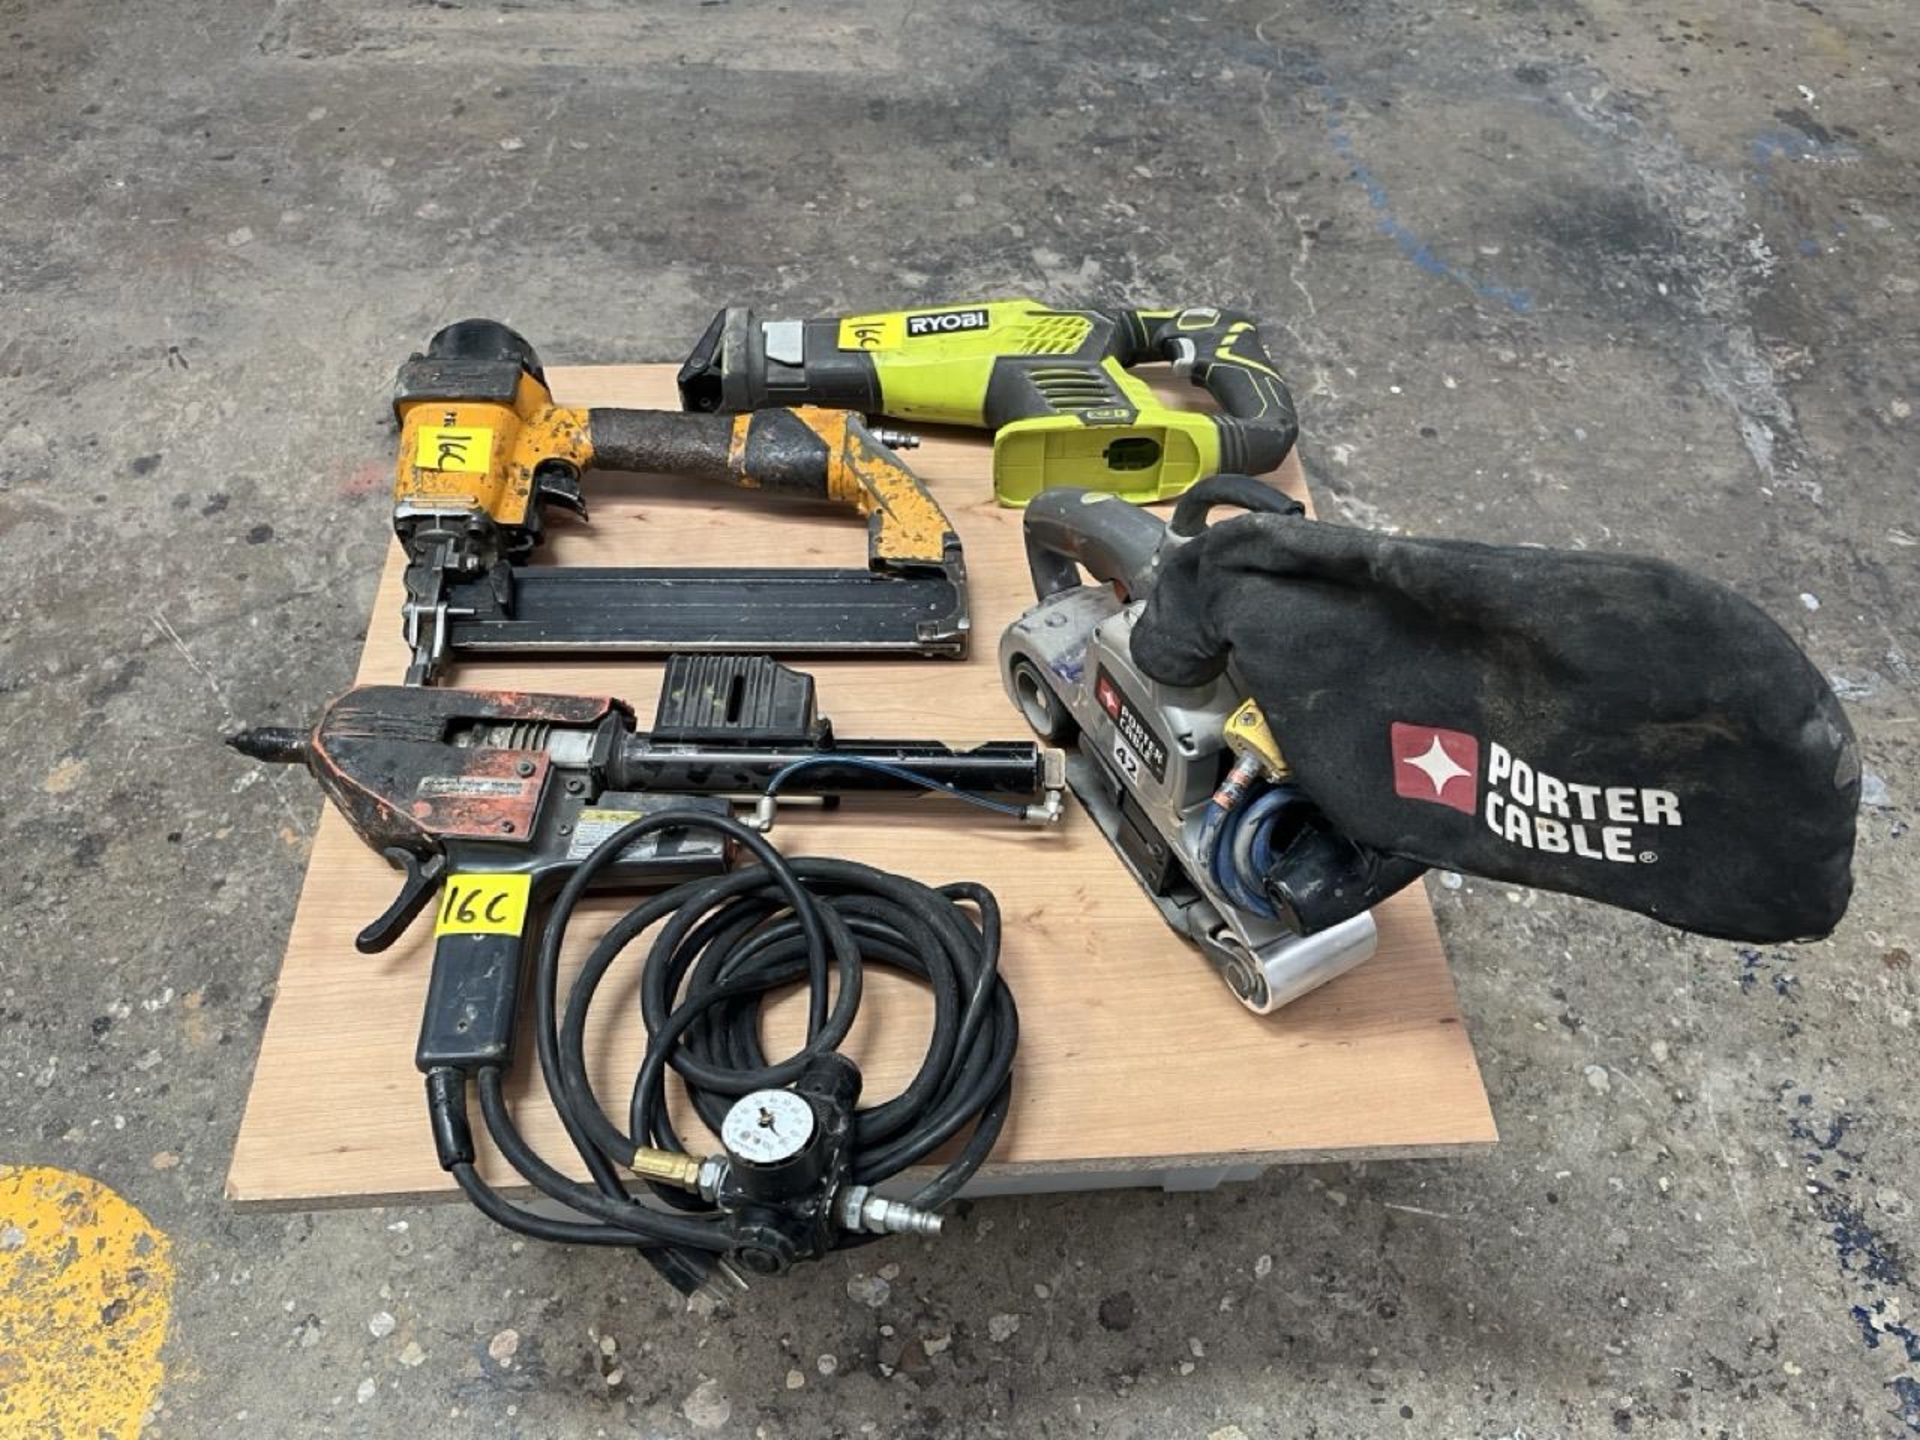 Lot of 4 pieces contains: 1 Porter electric sander with dust collector; 1 Ryobi wood saw without ba - Image 2 of 14